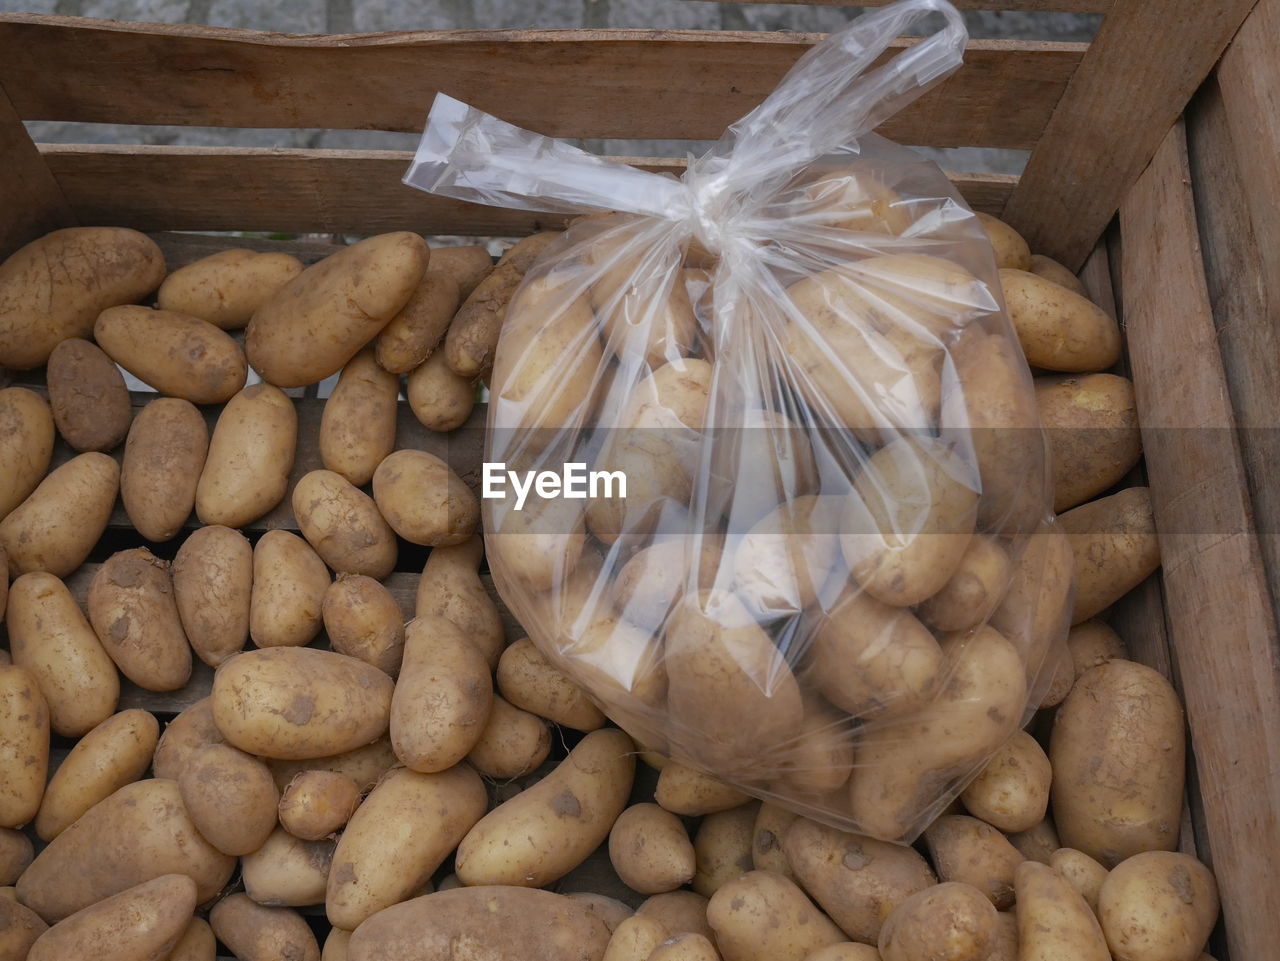 High angle view of potatoes in plastic bag for sale at market